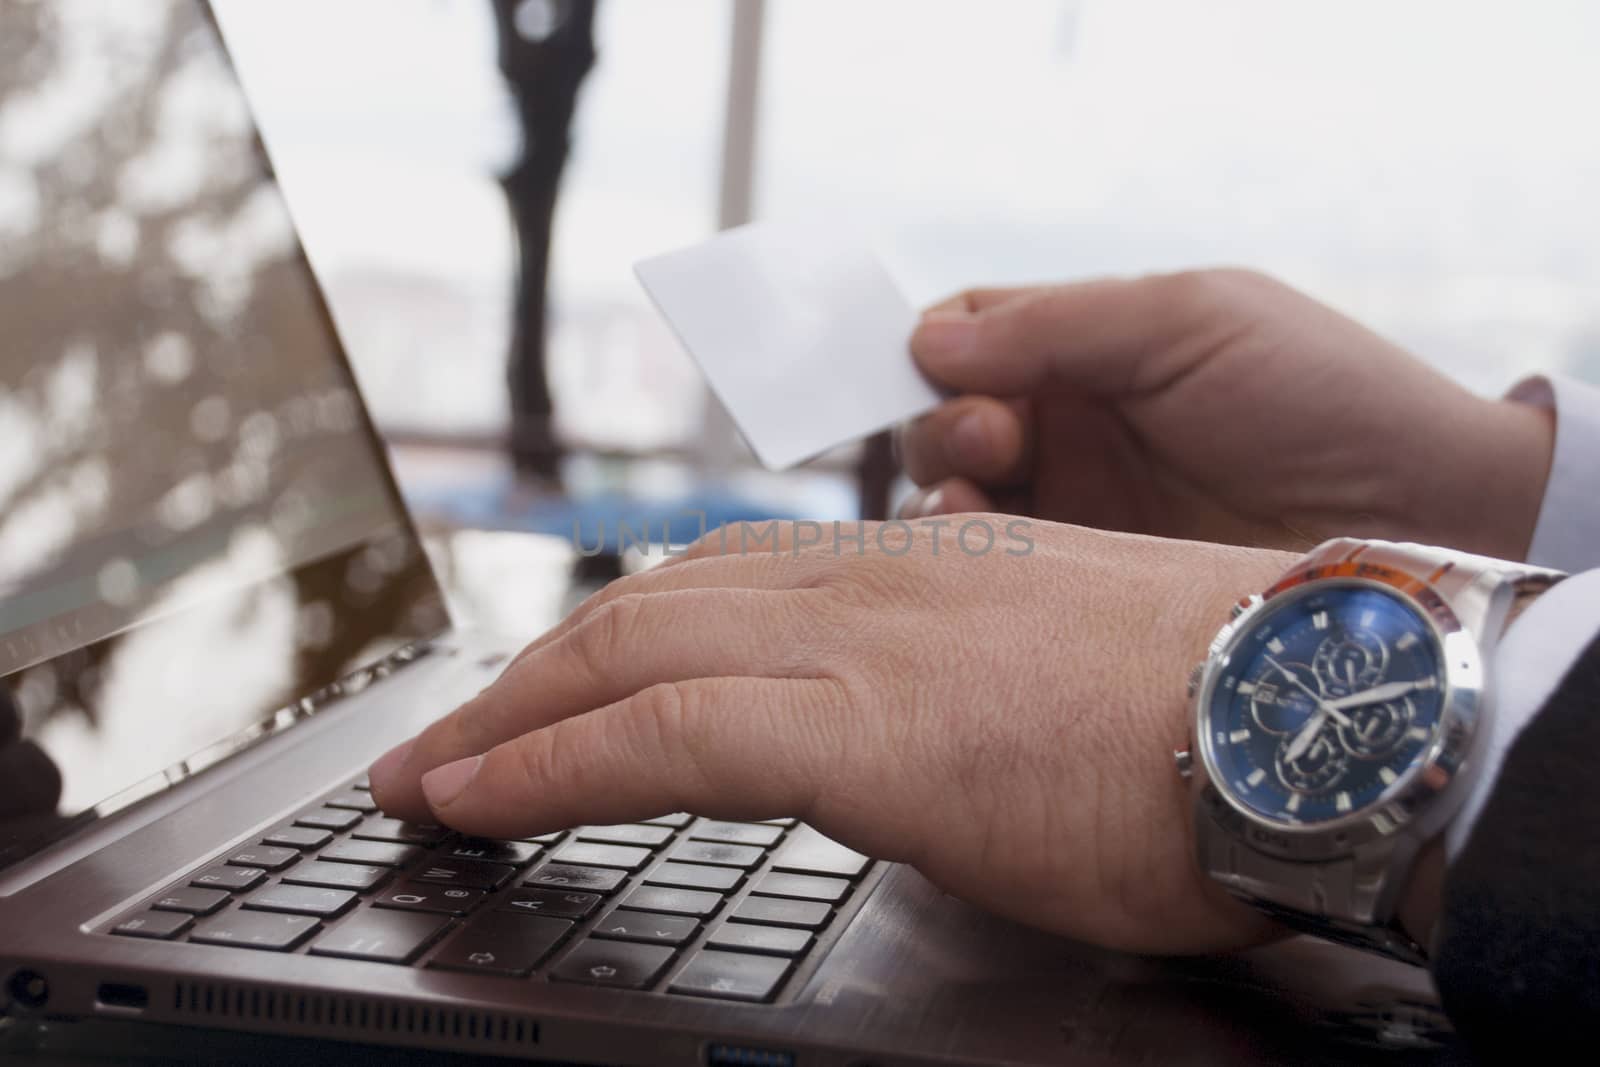 The rear view of male hands holding a credit card by typing on laptop computers while sitting across the image.